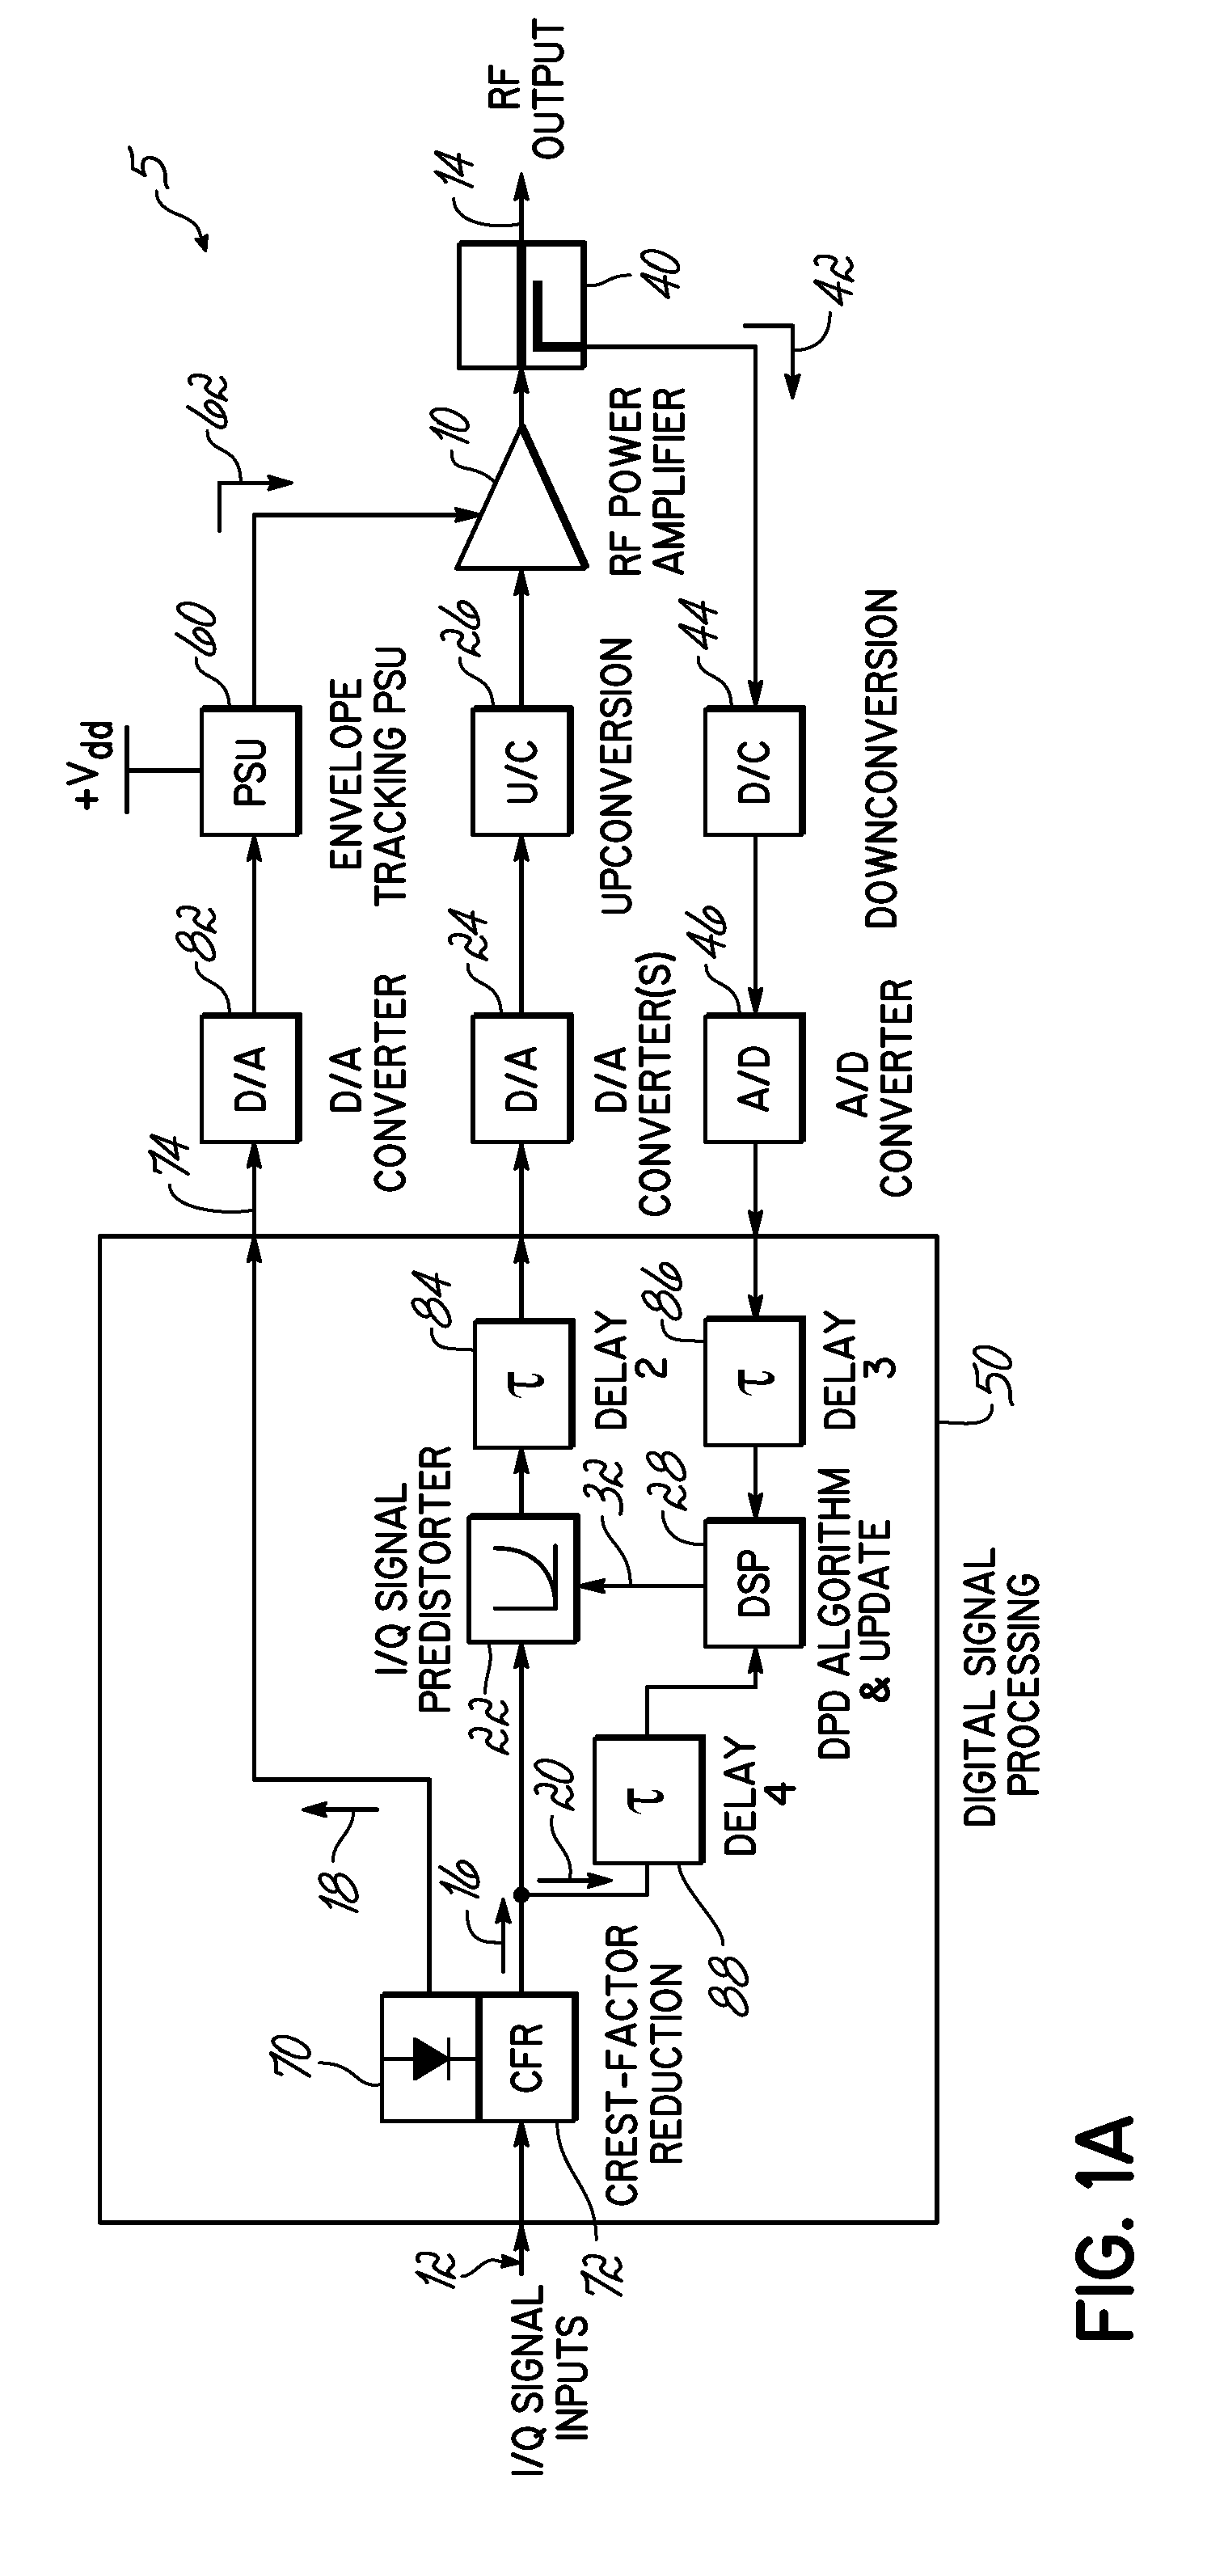 Integrated transceiver with envelope tracking